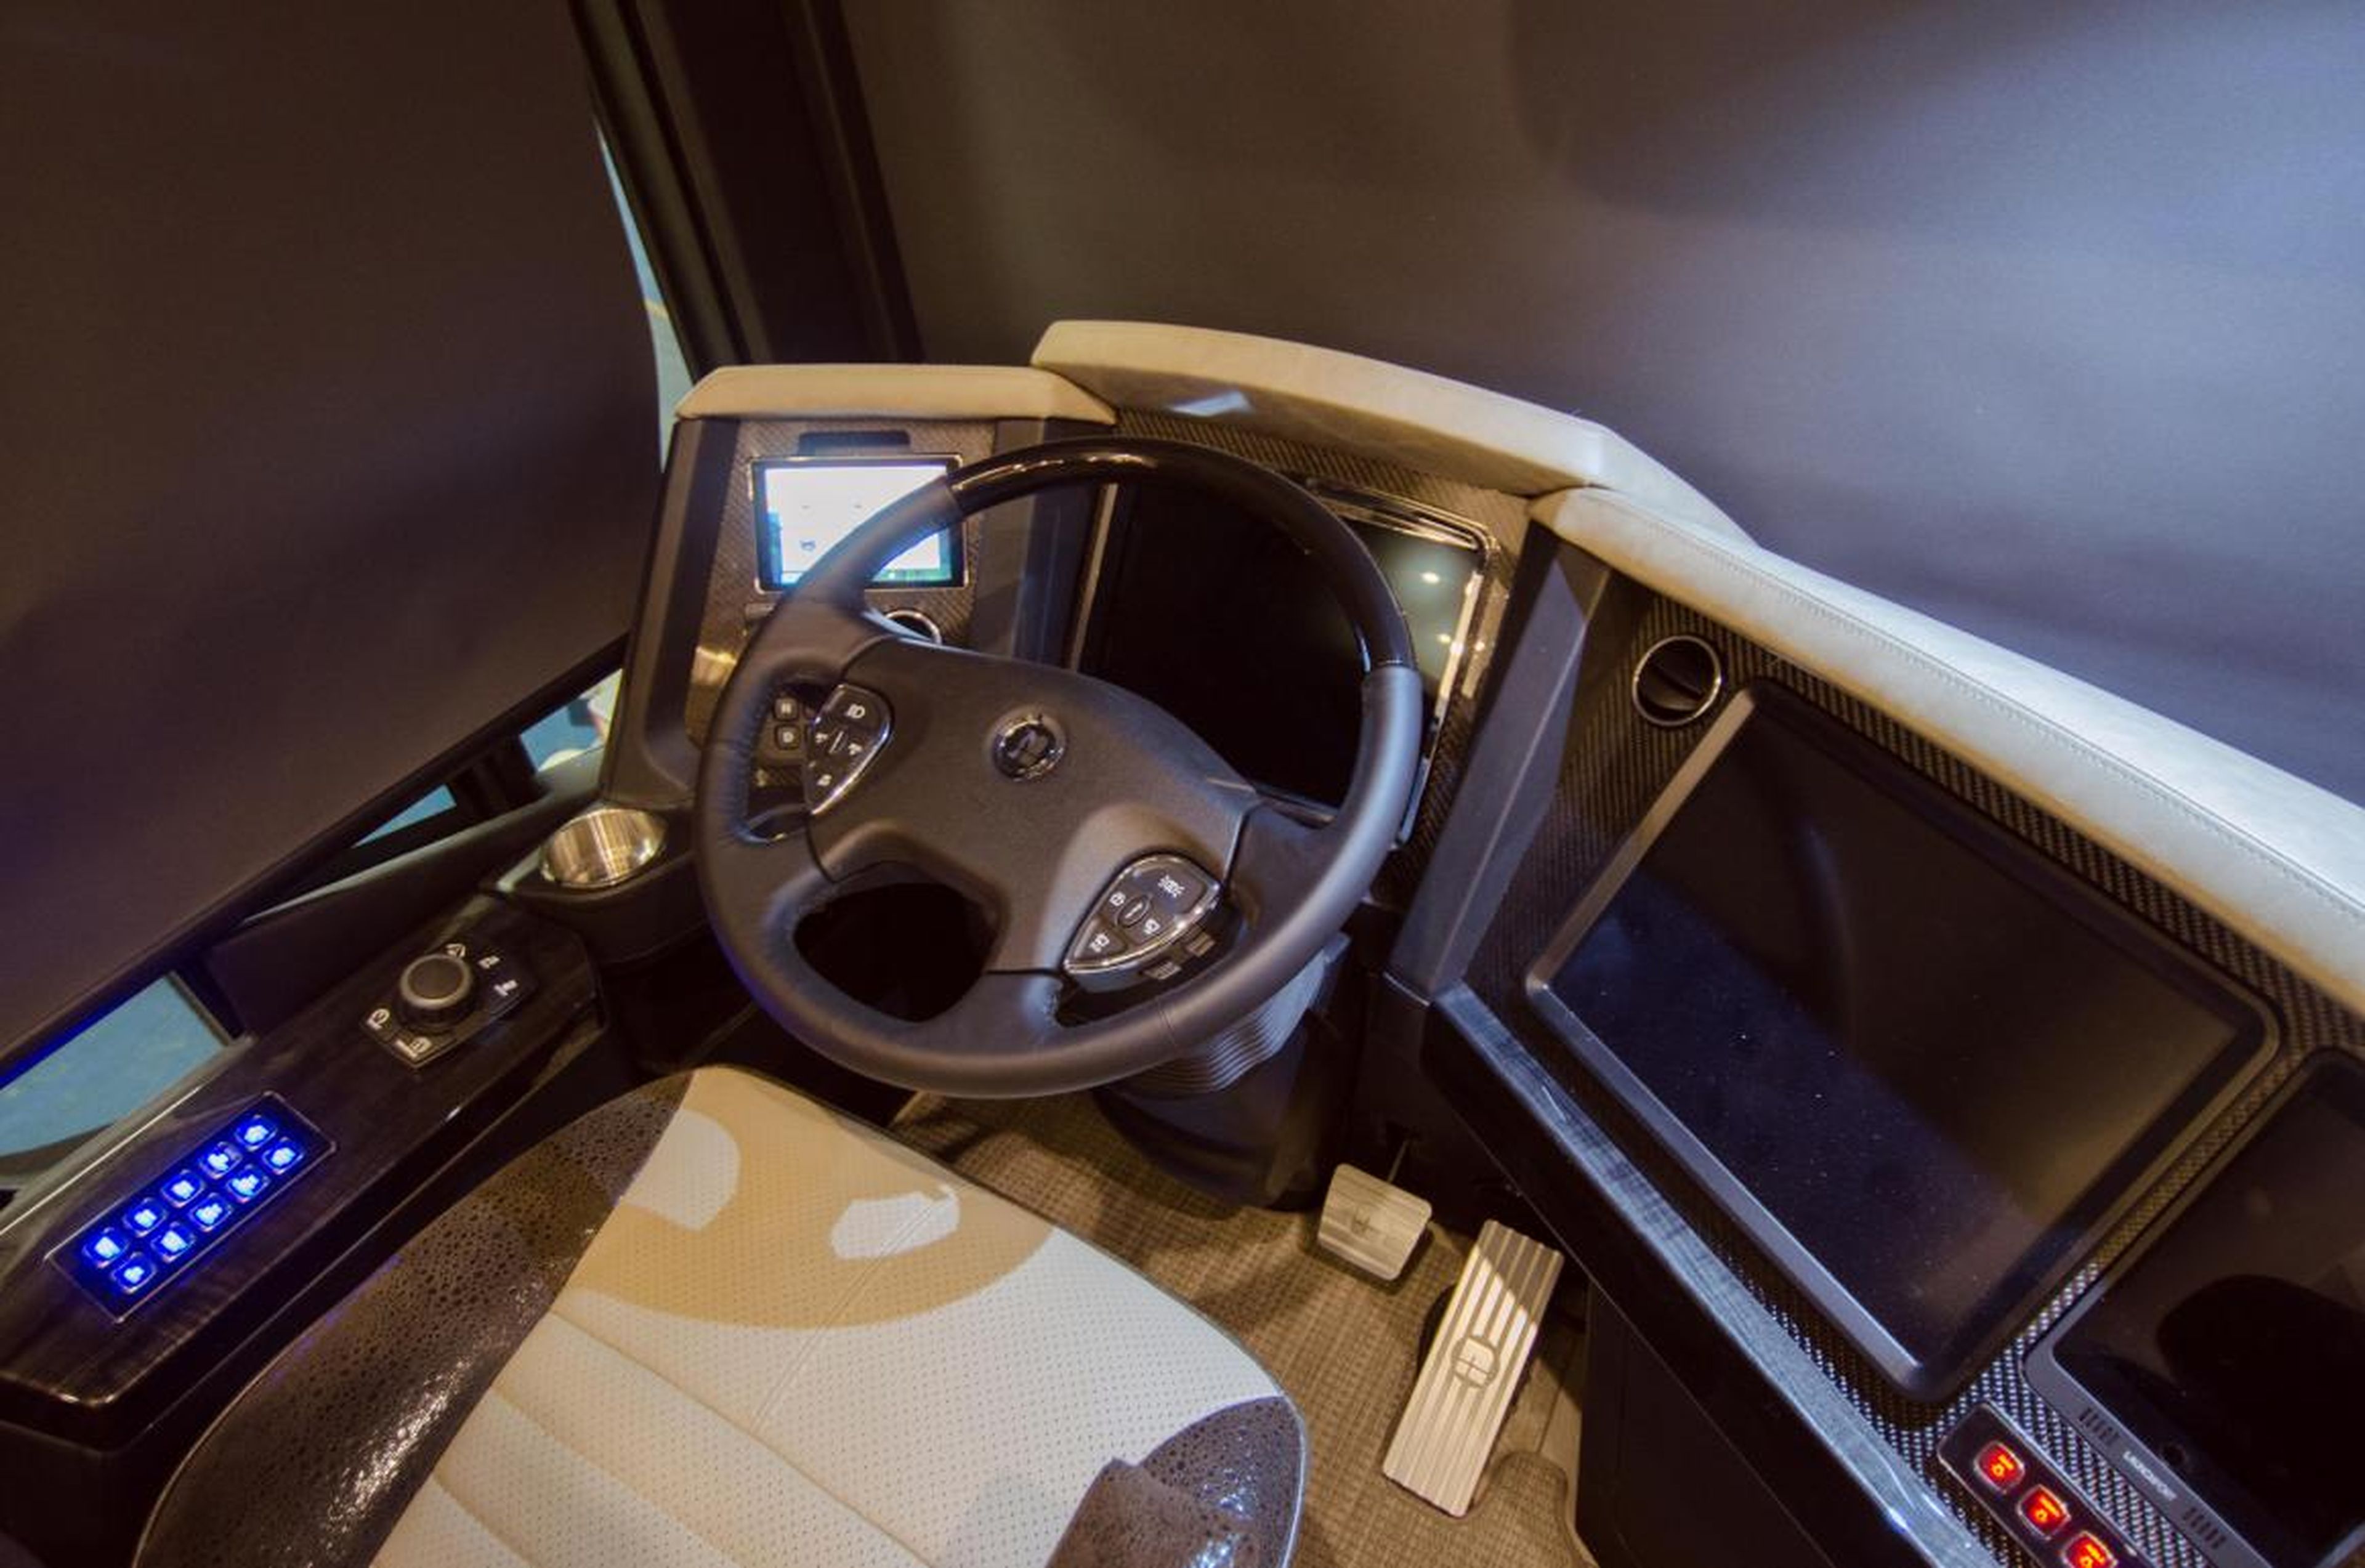 Driver's seat in the 2020 Newell Coach p50.